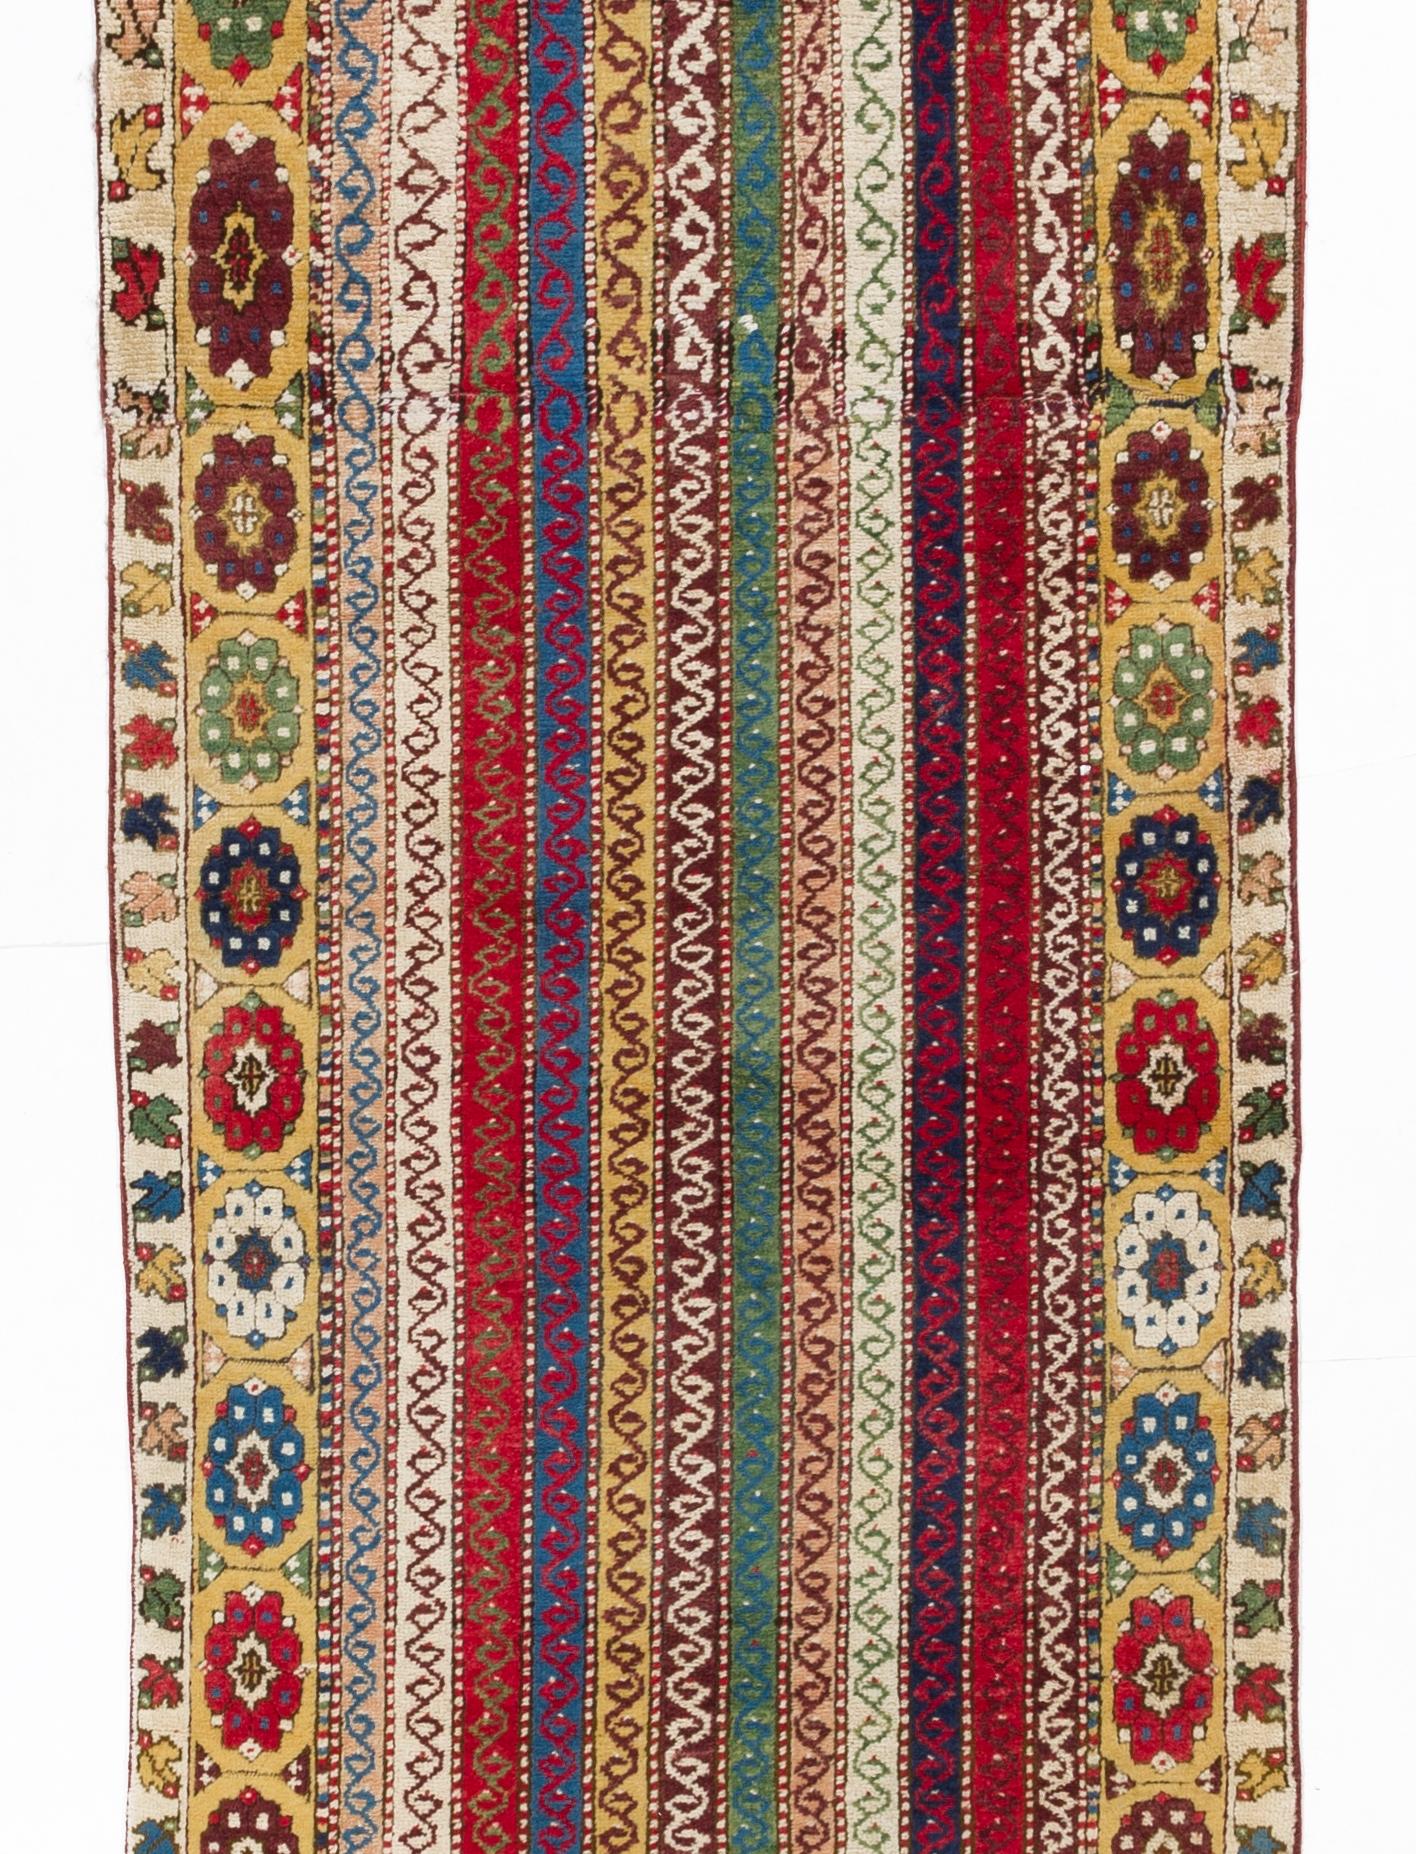 Bohemian 3.2x14.4 Ft Handmade Runner Rug from Konya / Turkey. All Wool and Natural Dyes For Sale